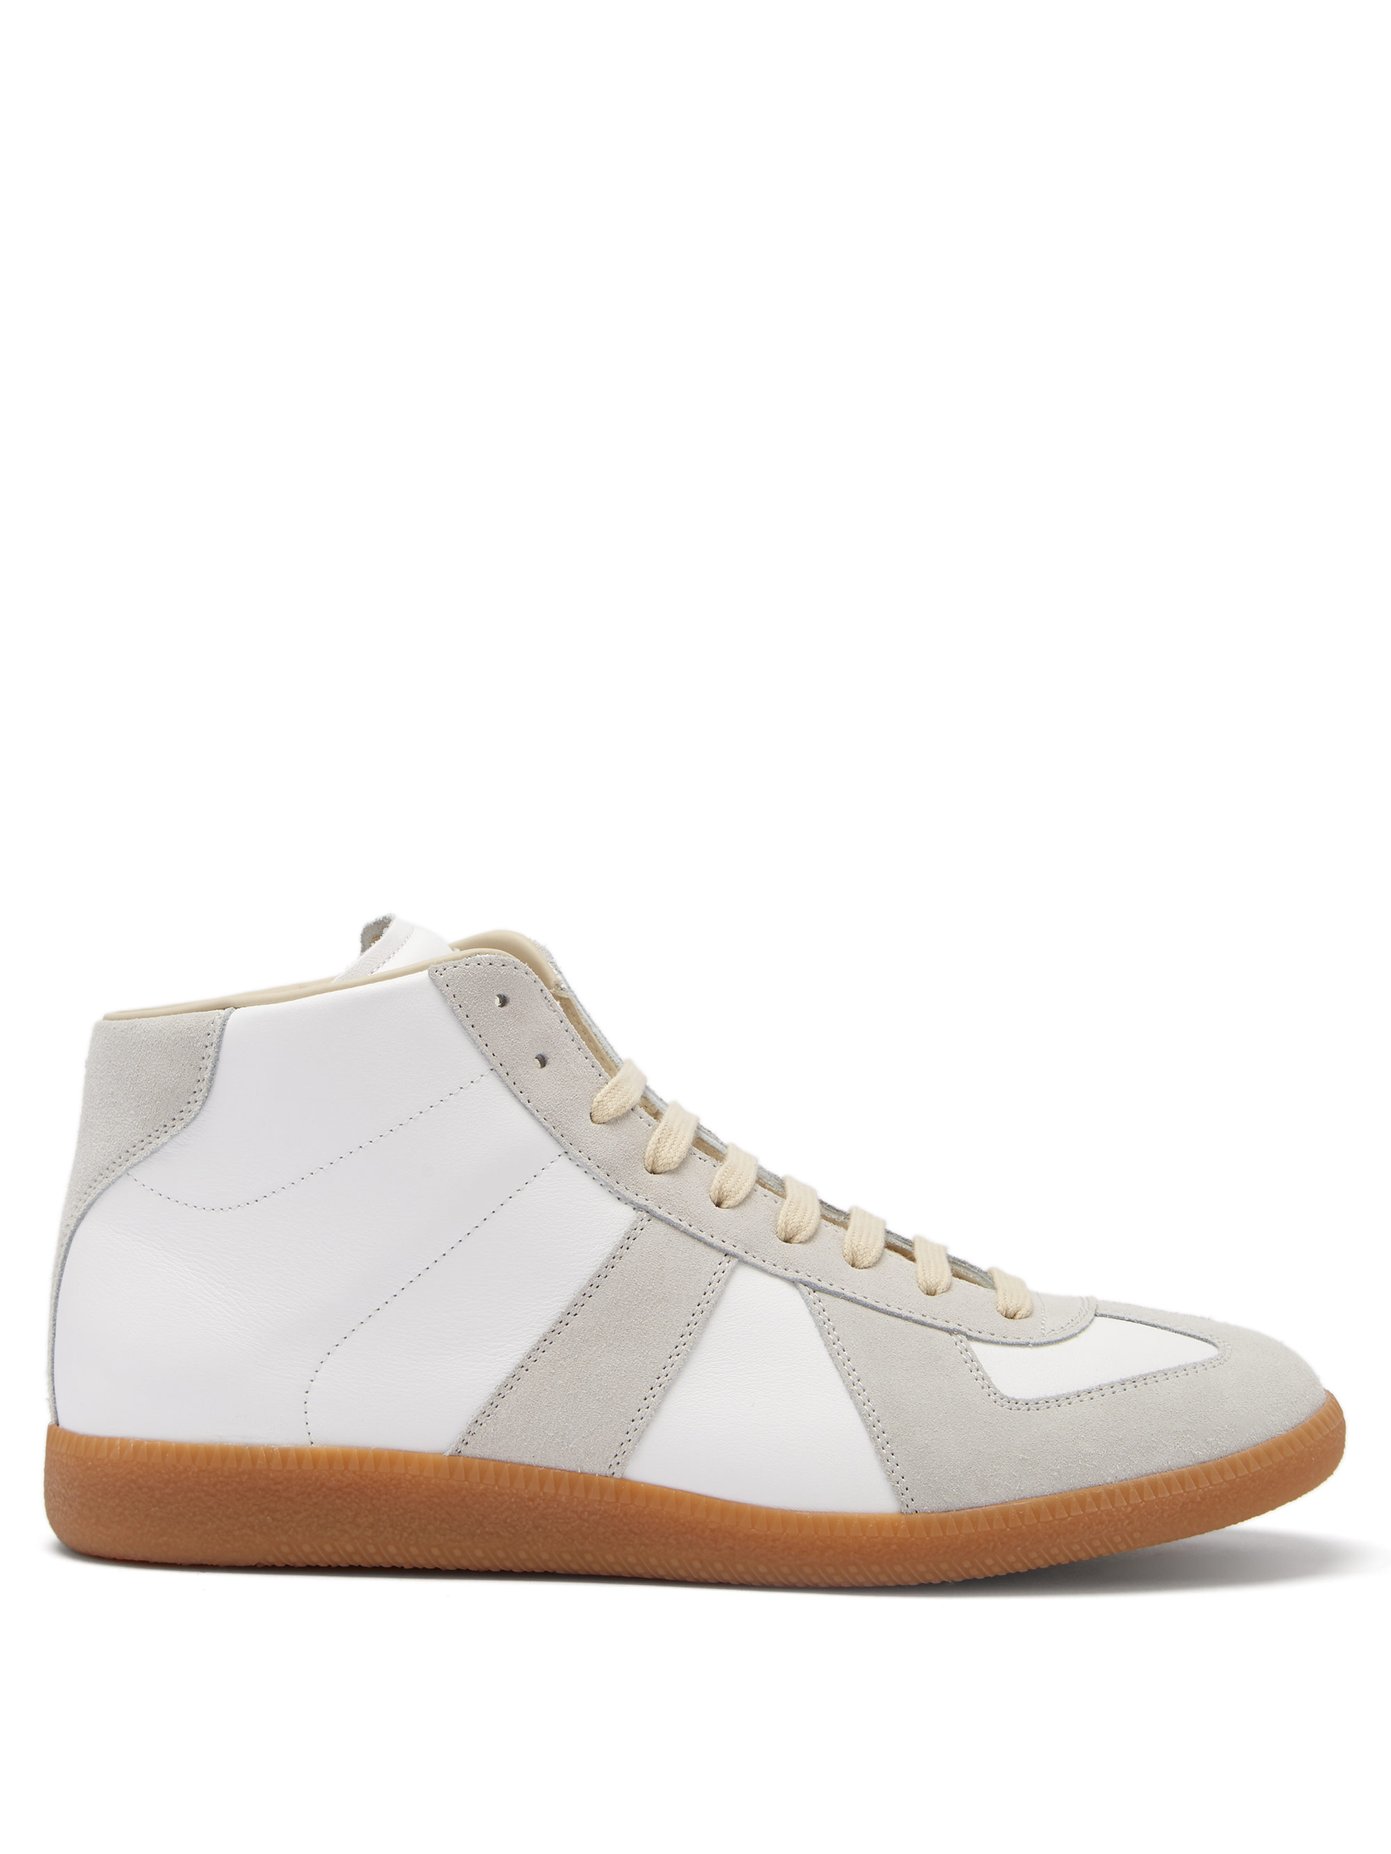 Replica high-top leather and suede 